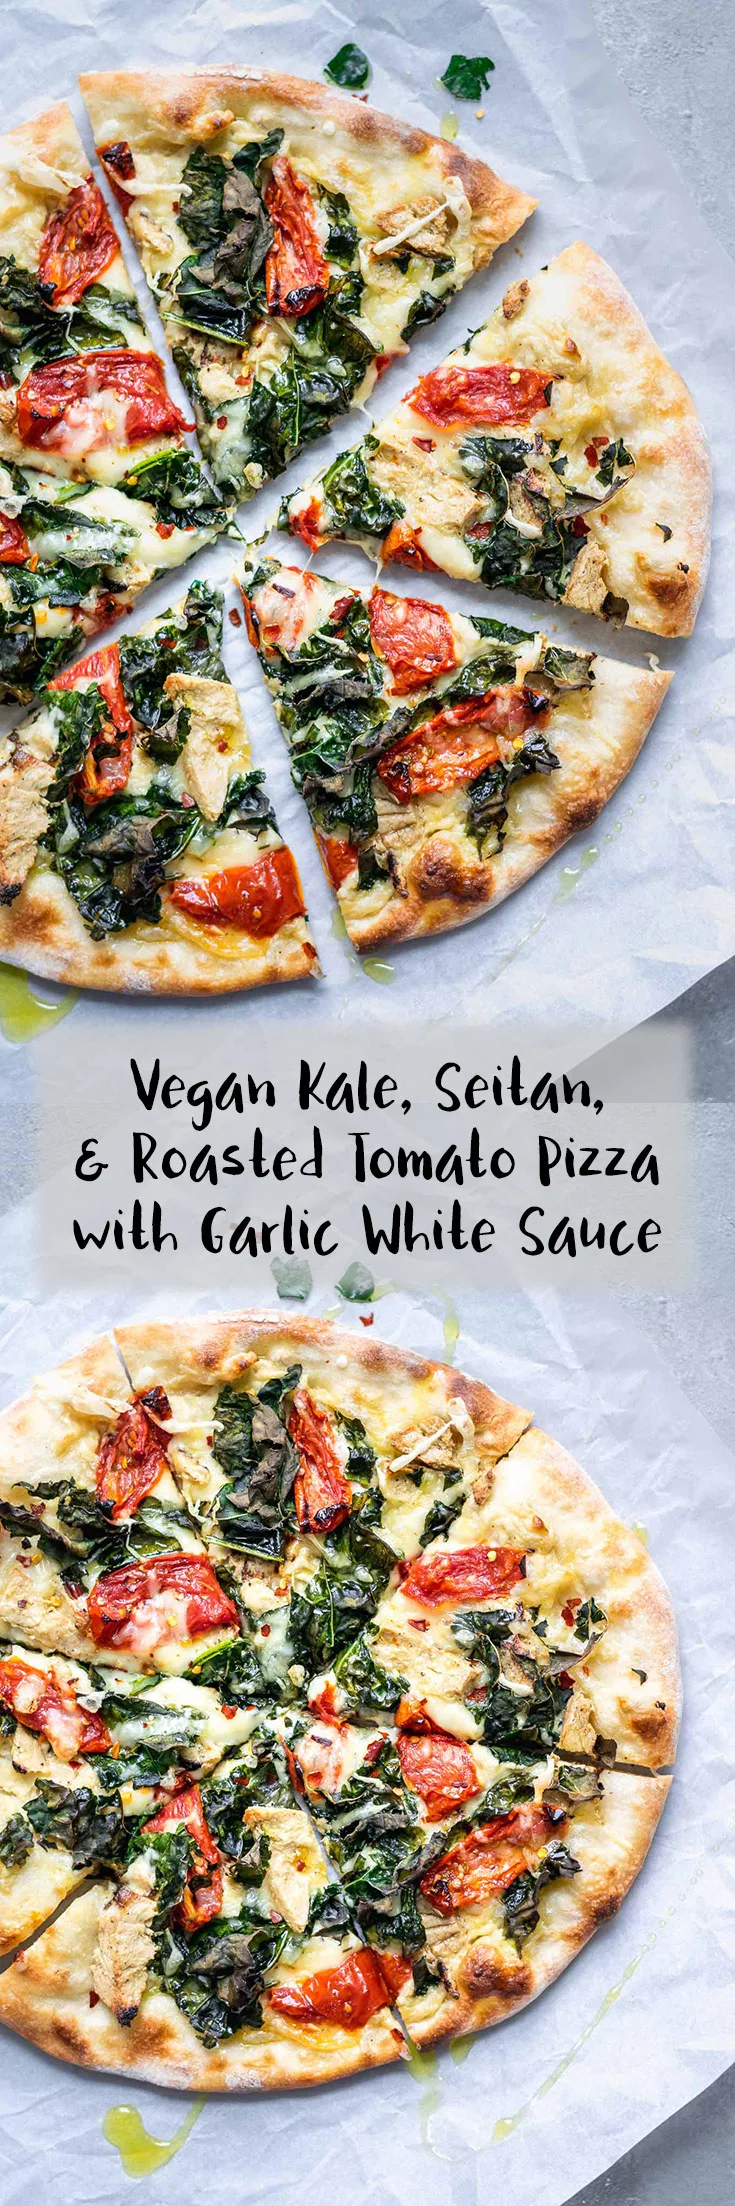 This ultra flavorful vegan pizza has a creamy garlic white sauce base, and is topped with seared seitan chicken, juicy roasted tomatoes, and torn kale which bakes up nice and crispy! | thecuriouschickpea.com #vegan #veganpizza #pizza